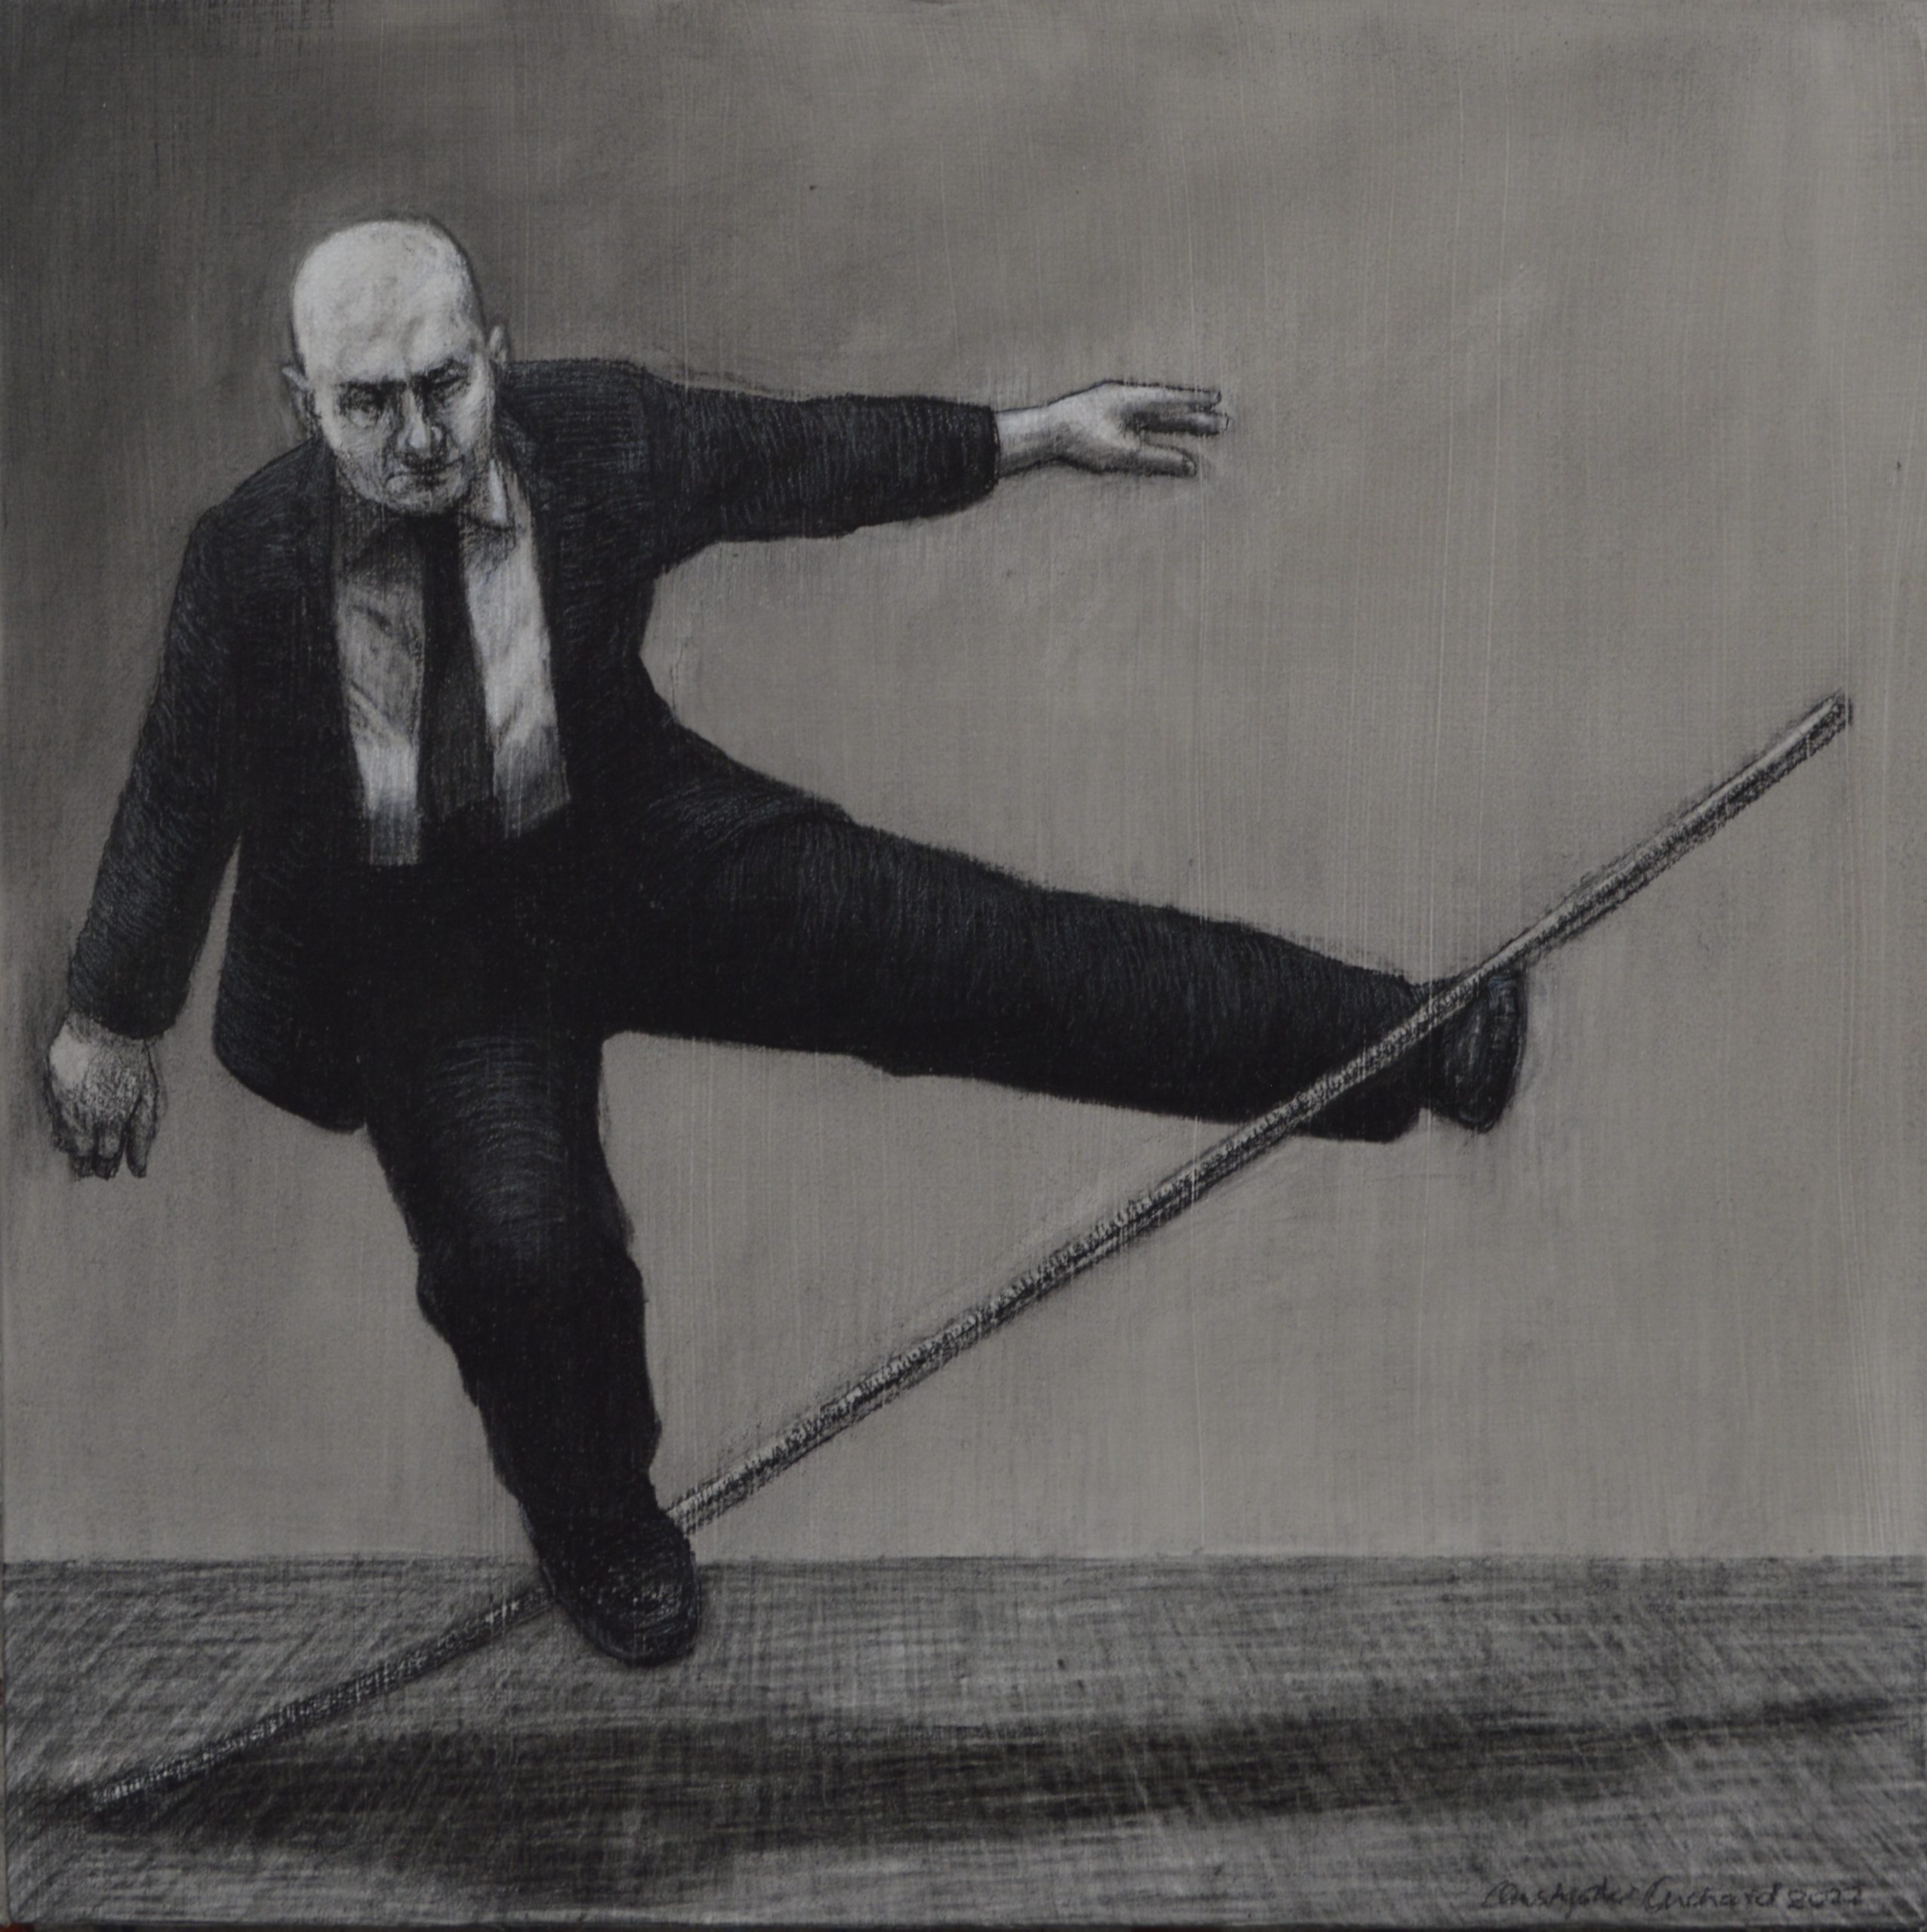 Christopher Orchard 'Pivot' charcoal on gesso on wood panel 40 x 40cm $3,300